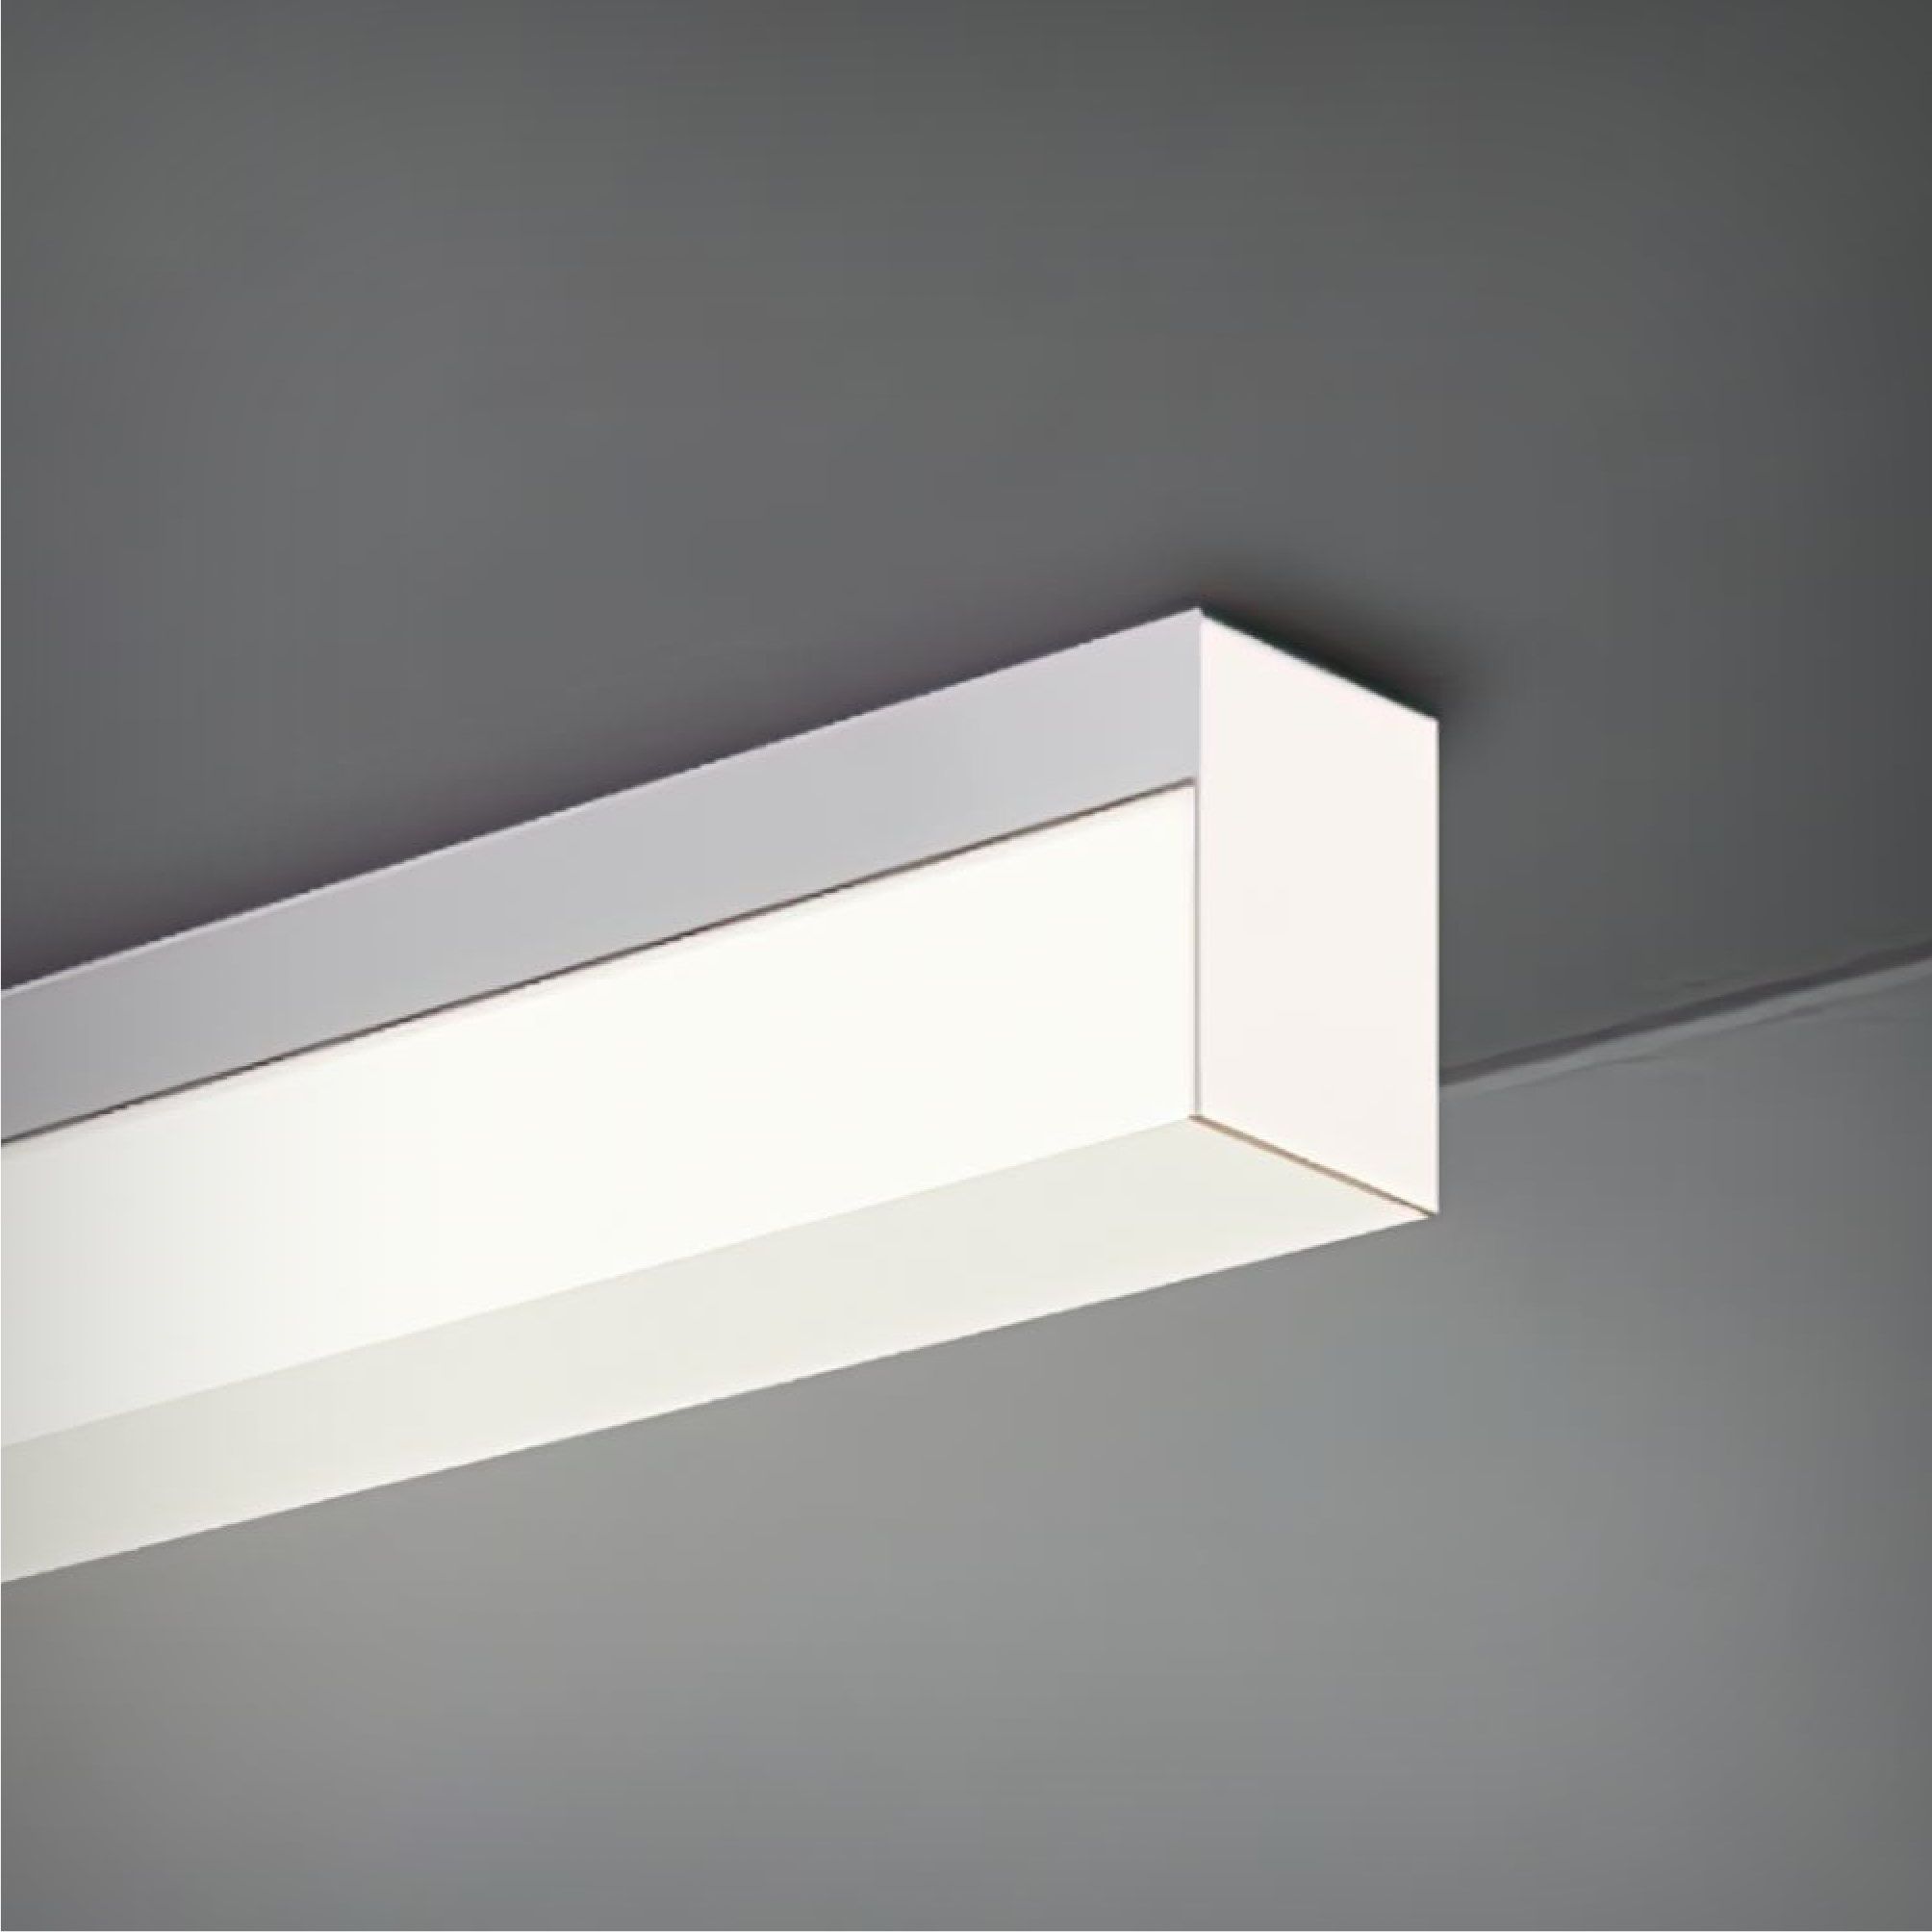 Slim LED Linear Ceiling Light with a 0.8-Inch profile